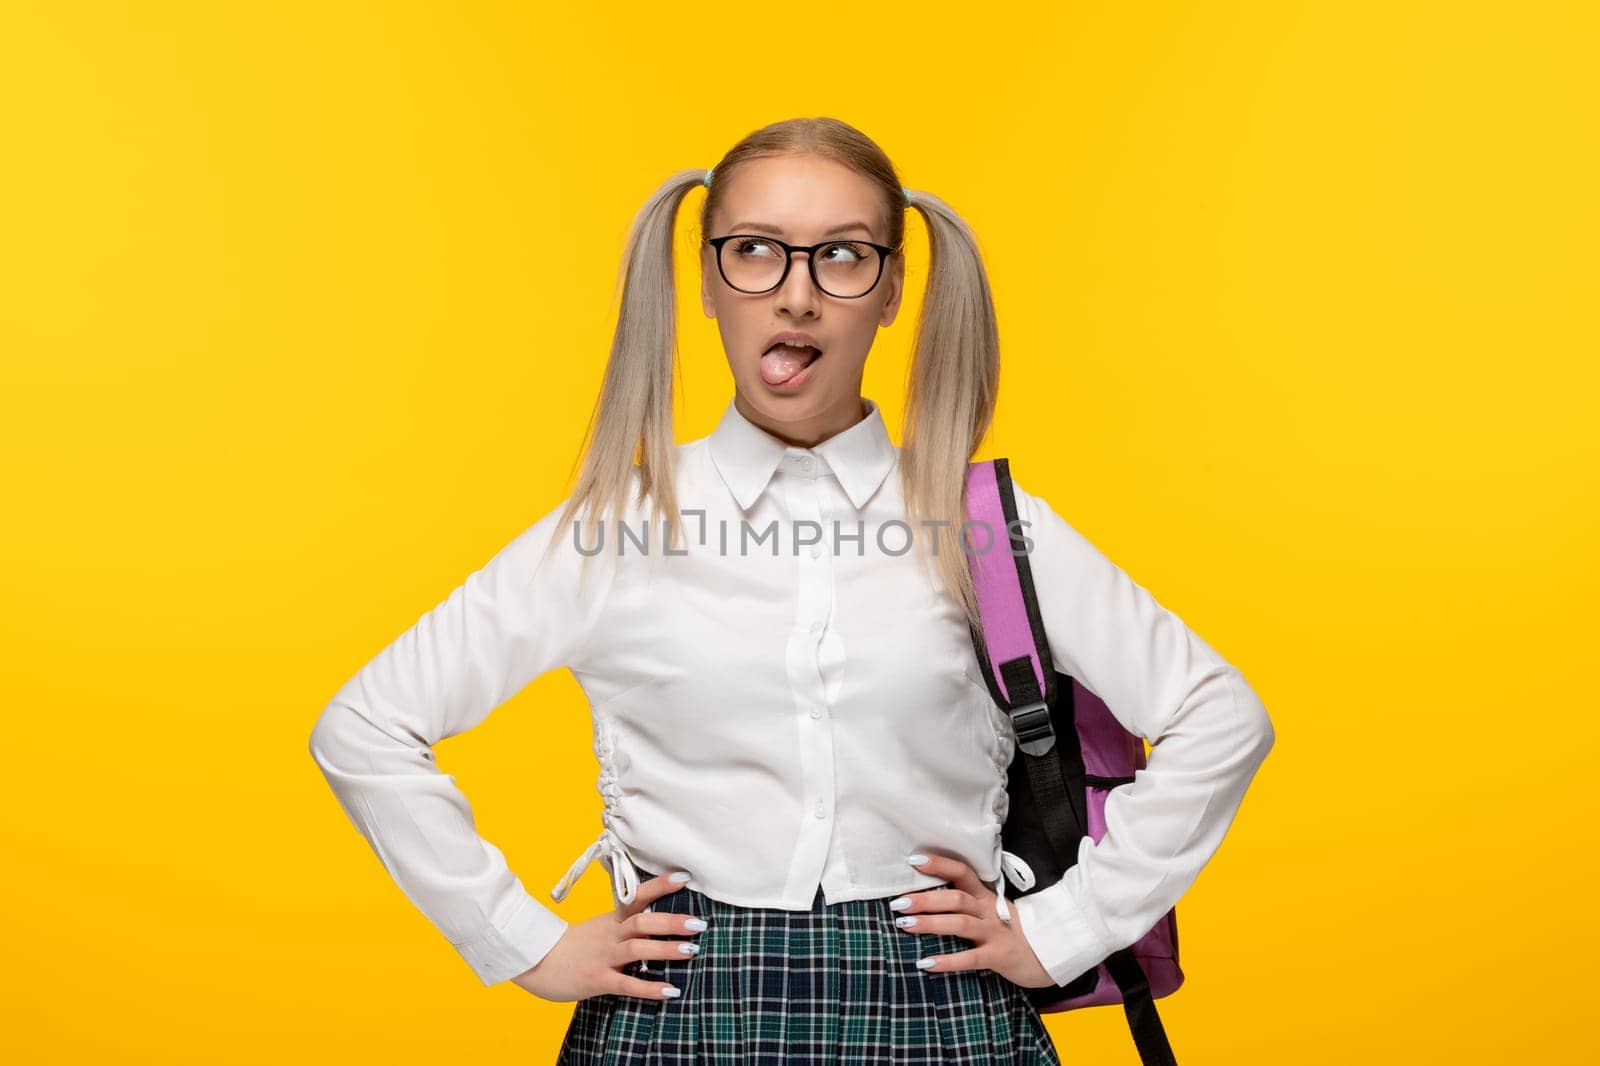 world book day blonde schoolgirl with tongue out in glasses on yellow background by Kamran